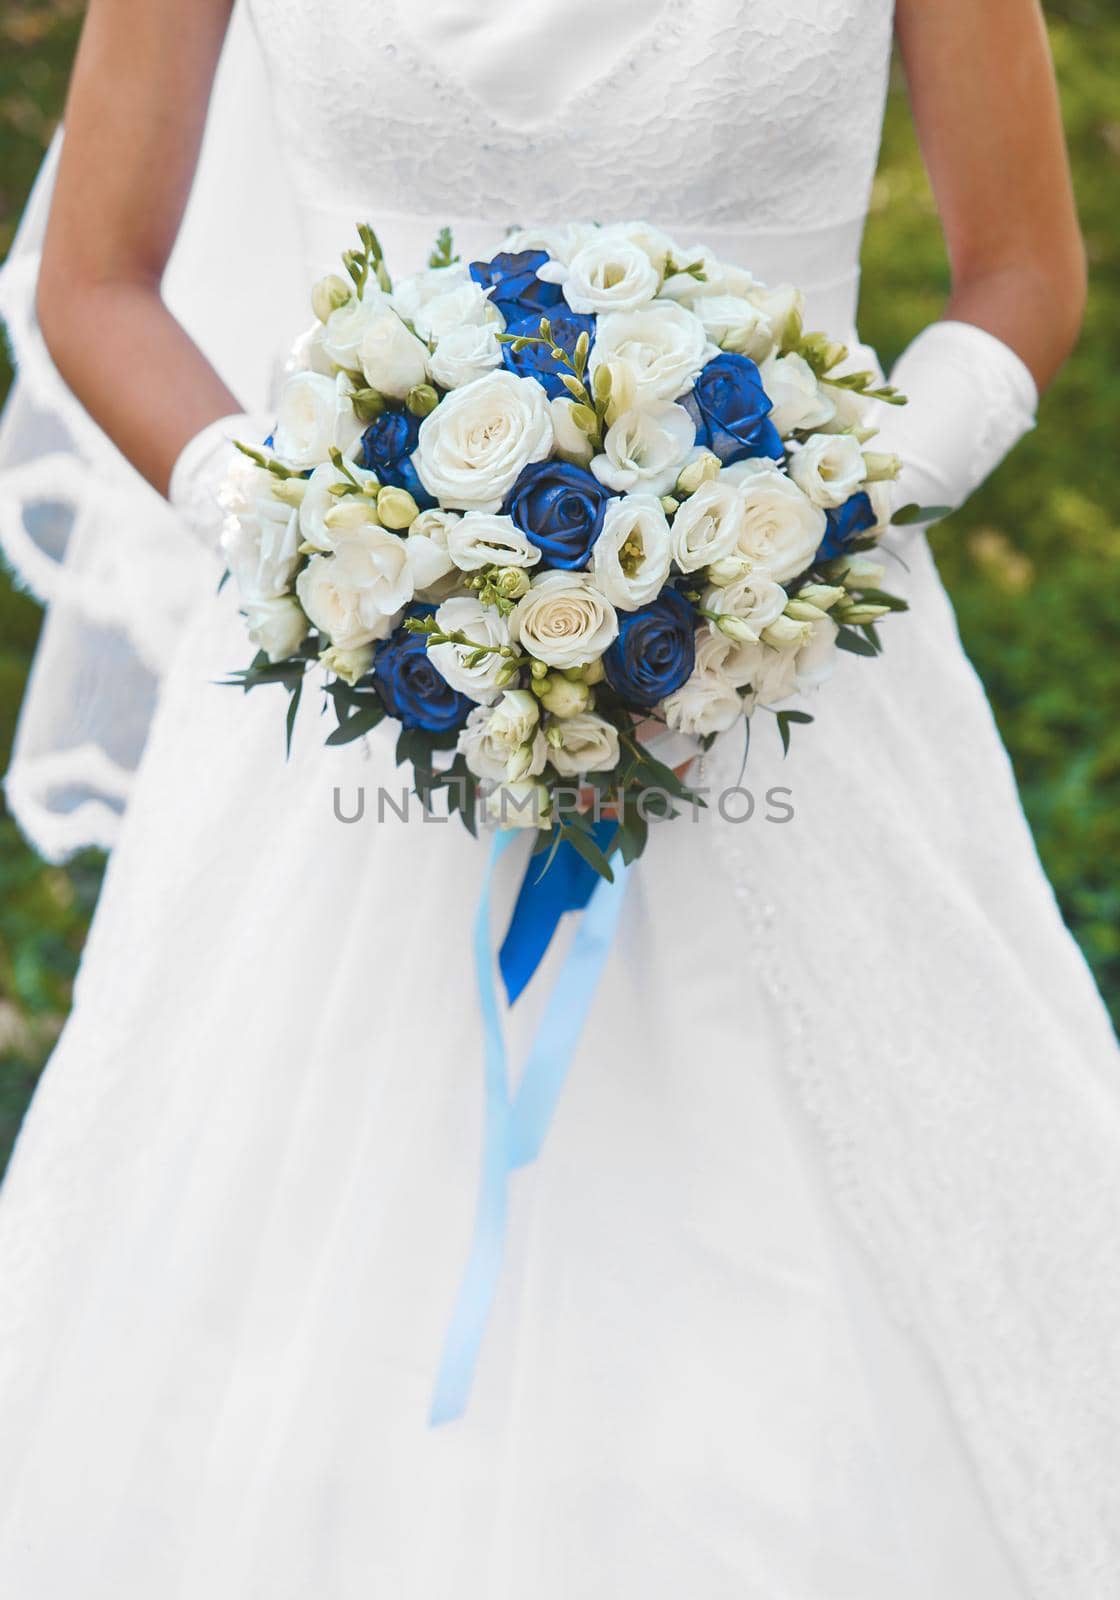 Bride in white wedding dress holds a bouquet of flowers white and blue roses close up.